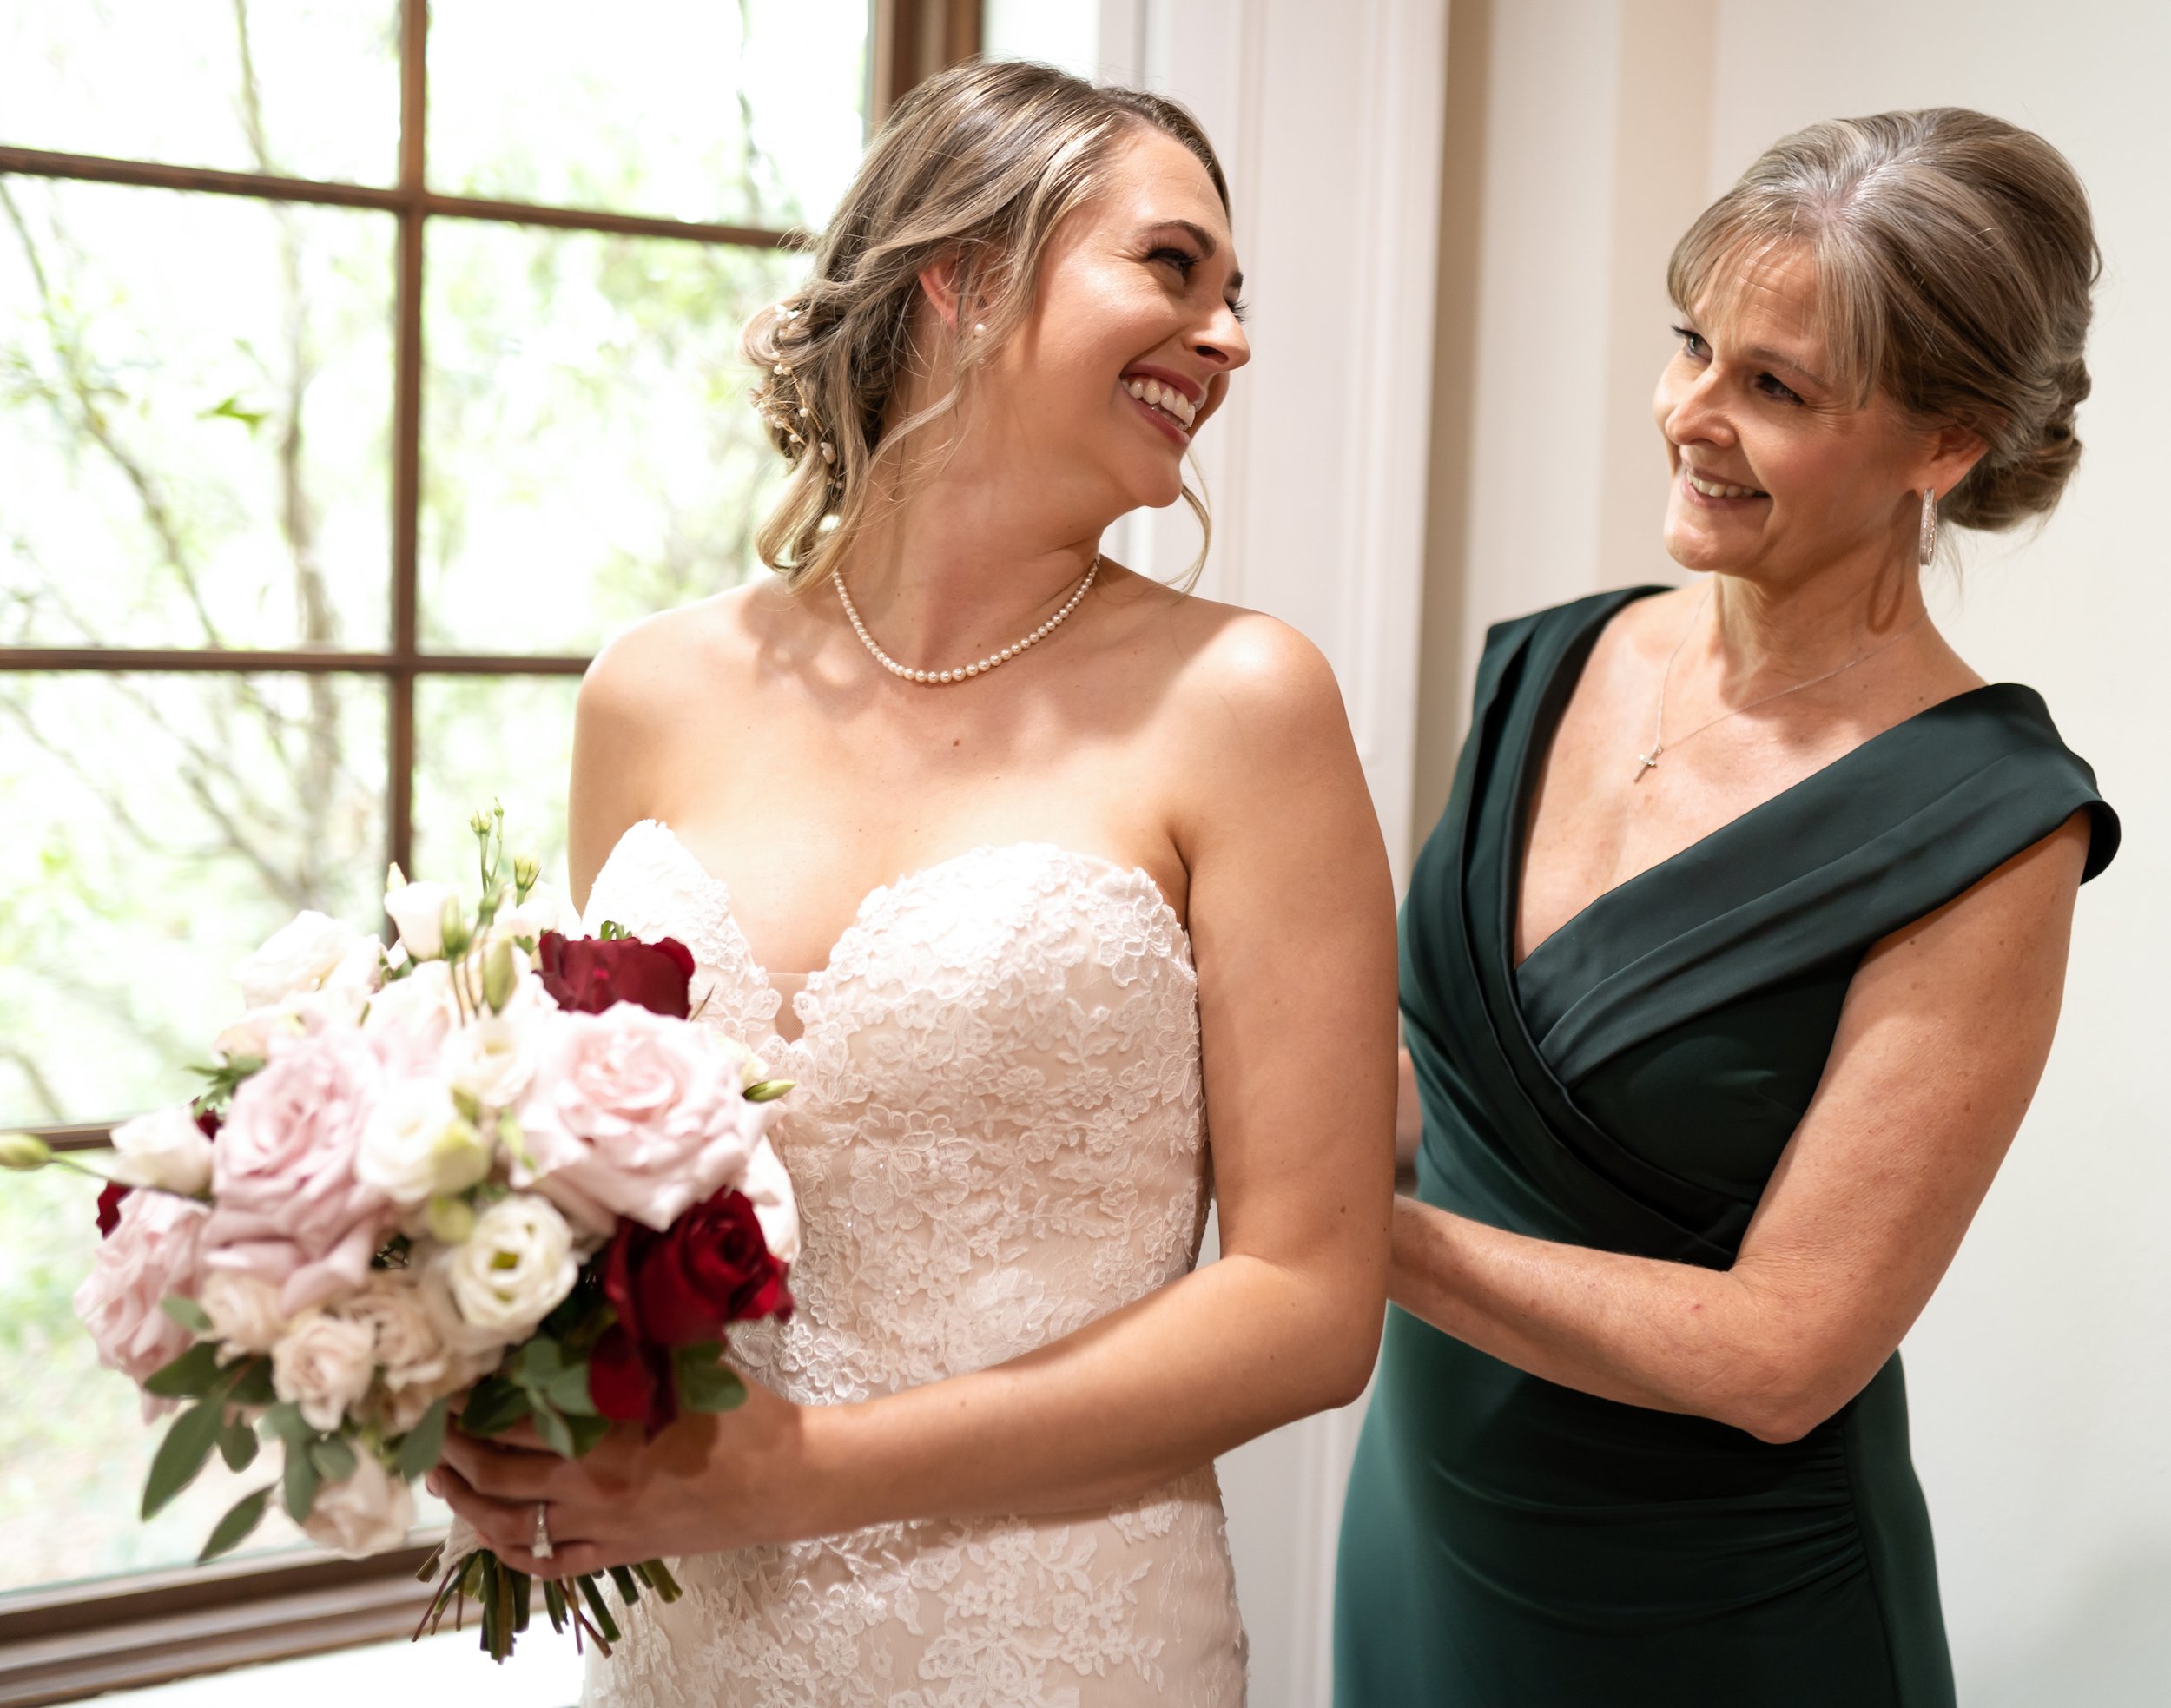 The bride smiles at her mom while she zips her gown at The Carriage House in Montgomery, TX.